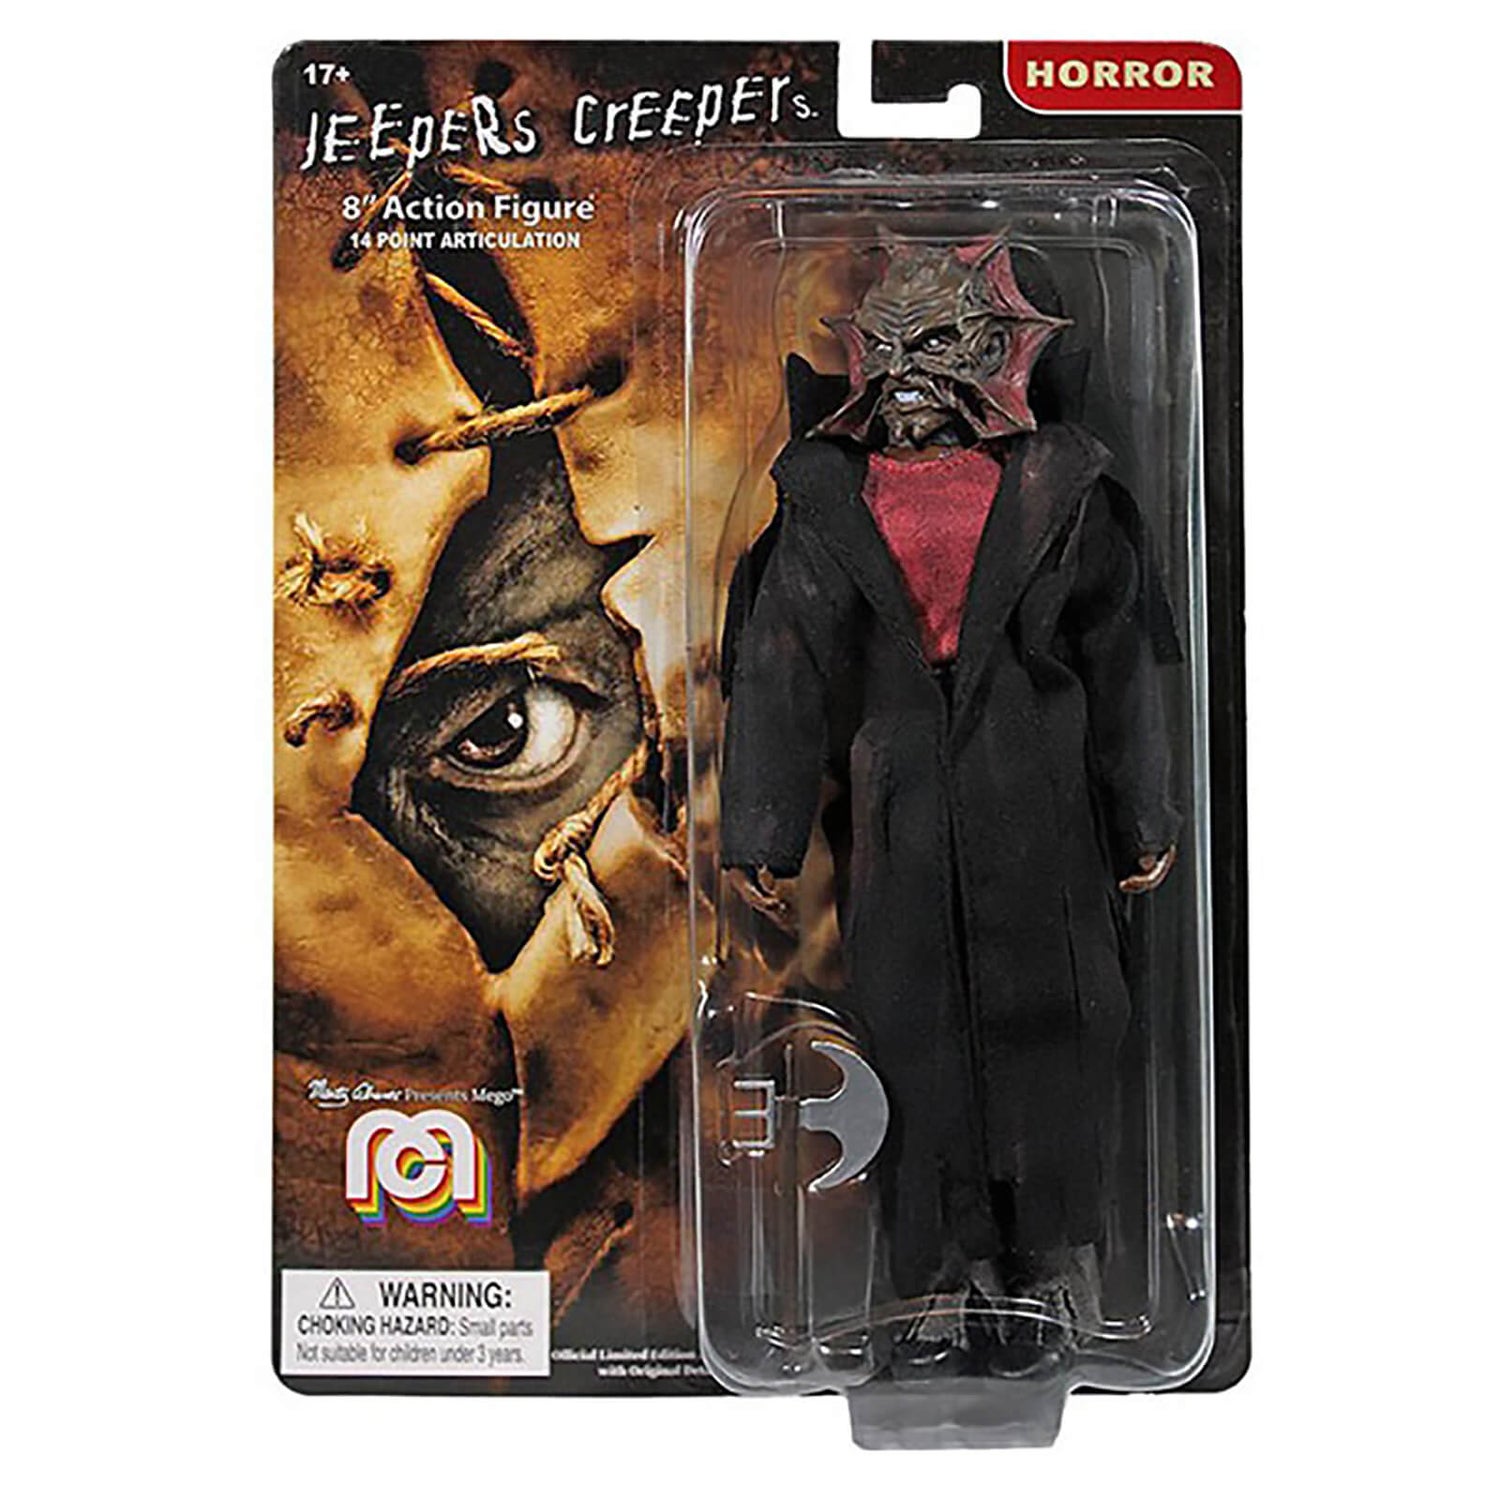 Figurine Mego 20 cm - Jeepers Creepers